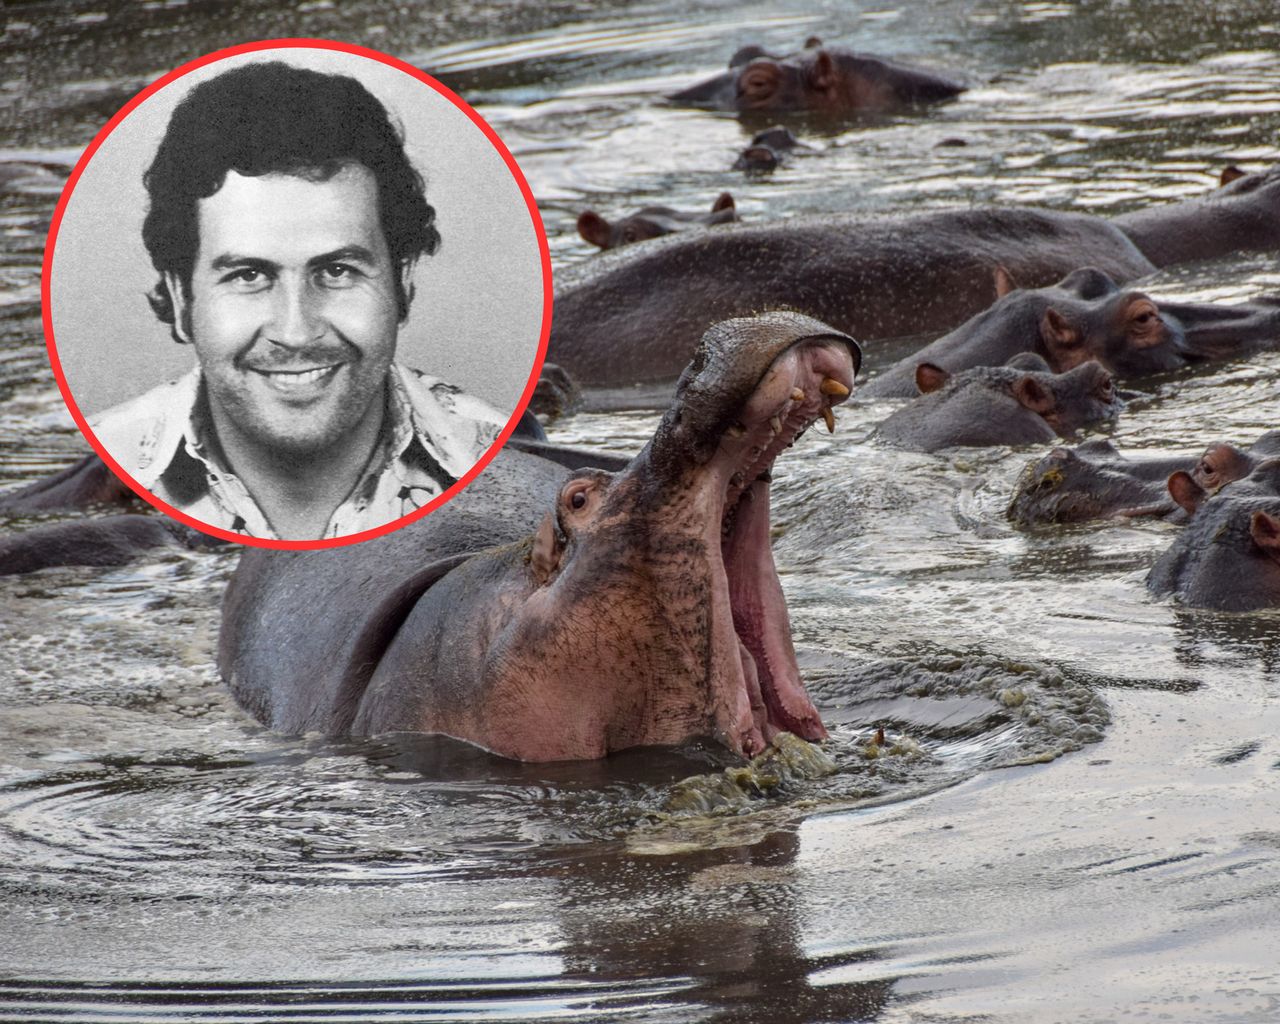 Escobar's posthumous headache. Colombia's growing hippo crisis may lead to mass relocation